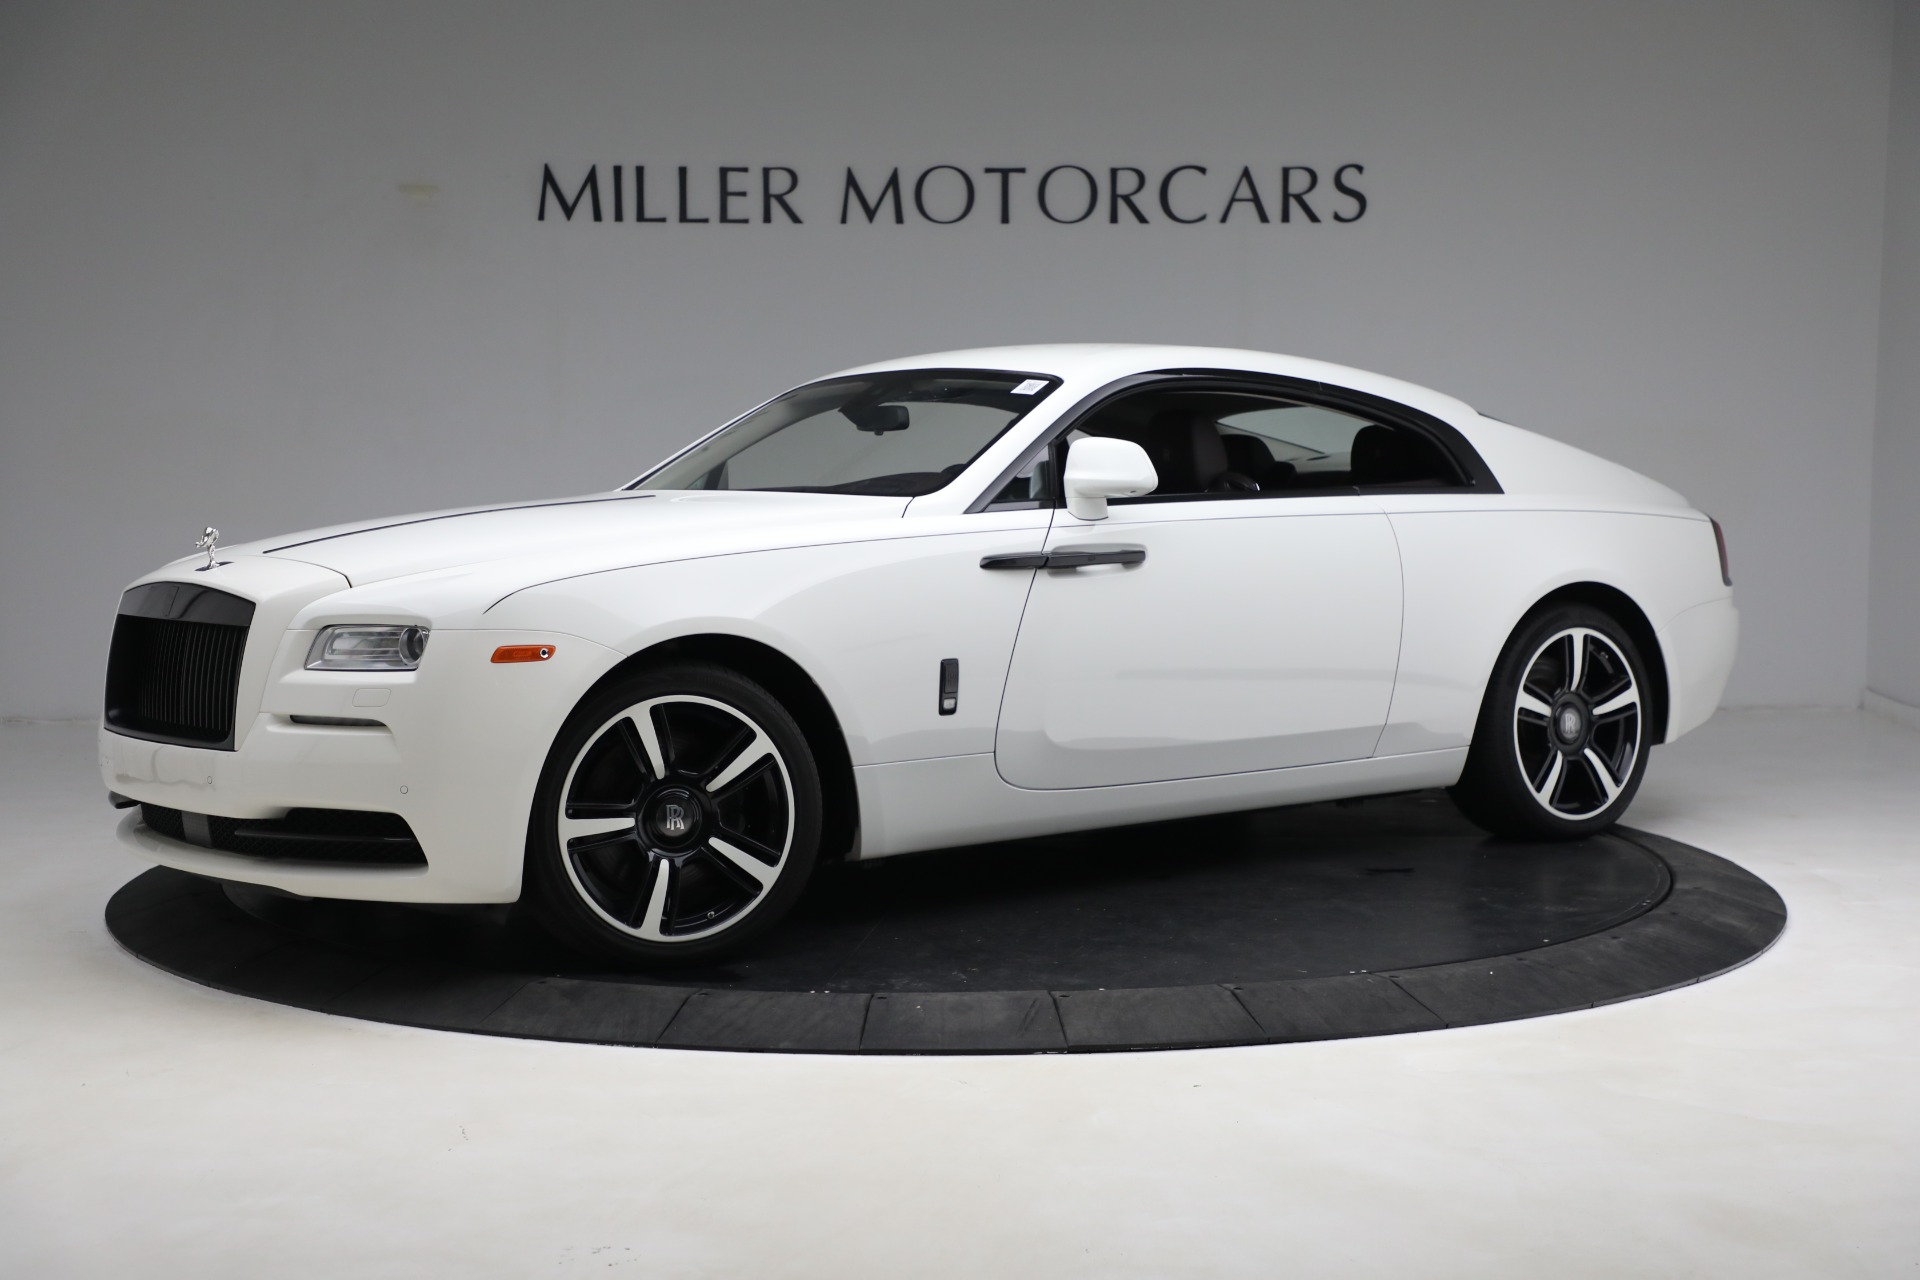 Used 2014 Rolls-Royce Wraith for sale Sold at Maserati of Greenwich in Greenwich CT 06830 1